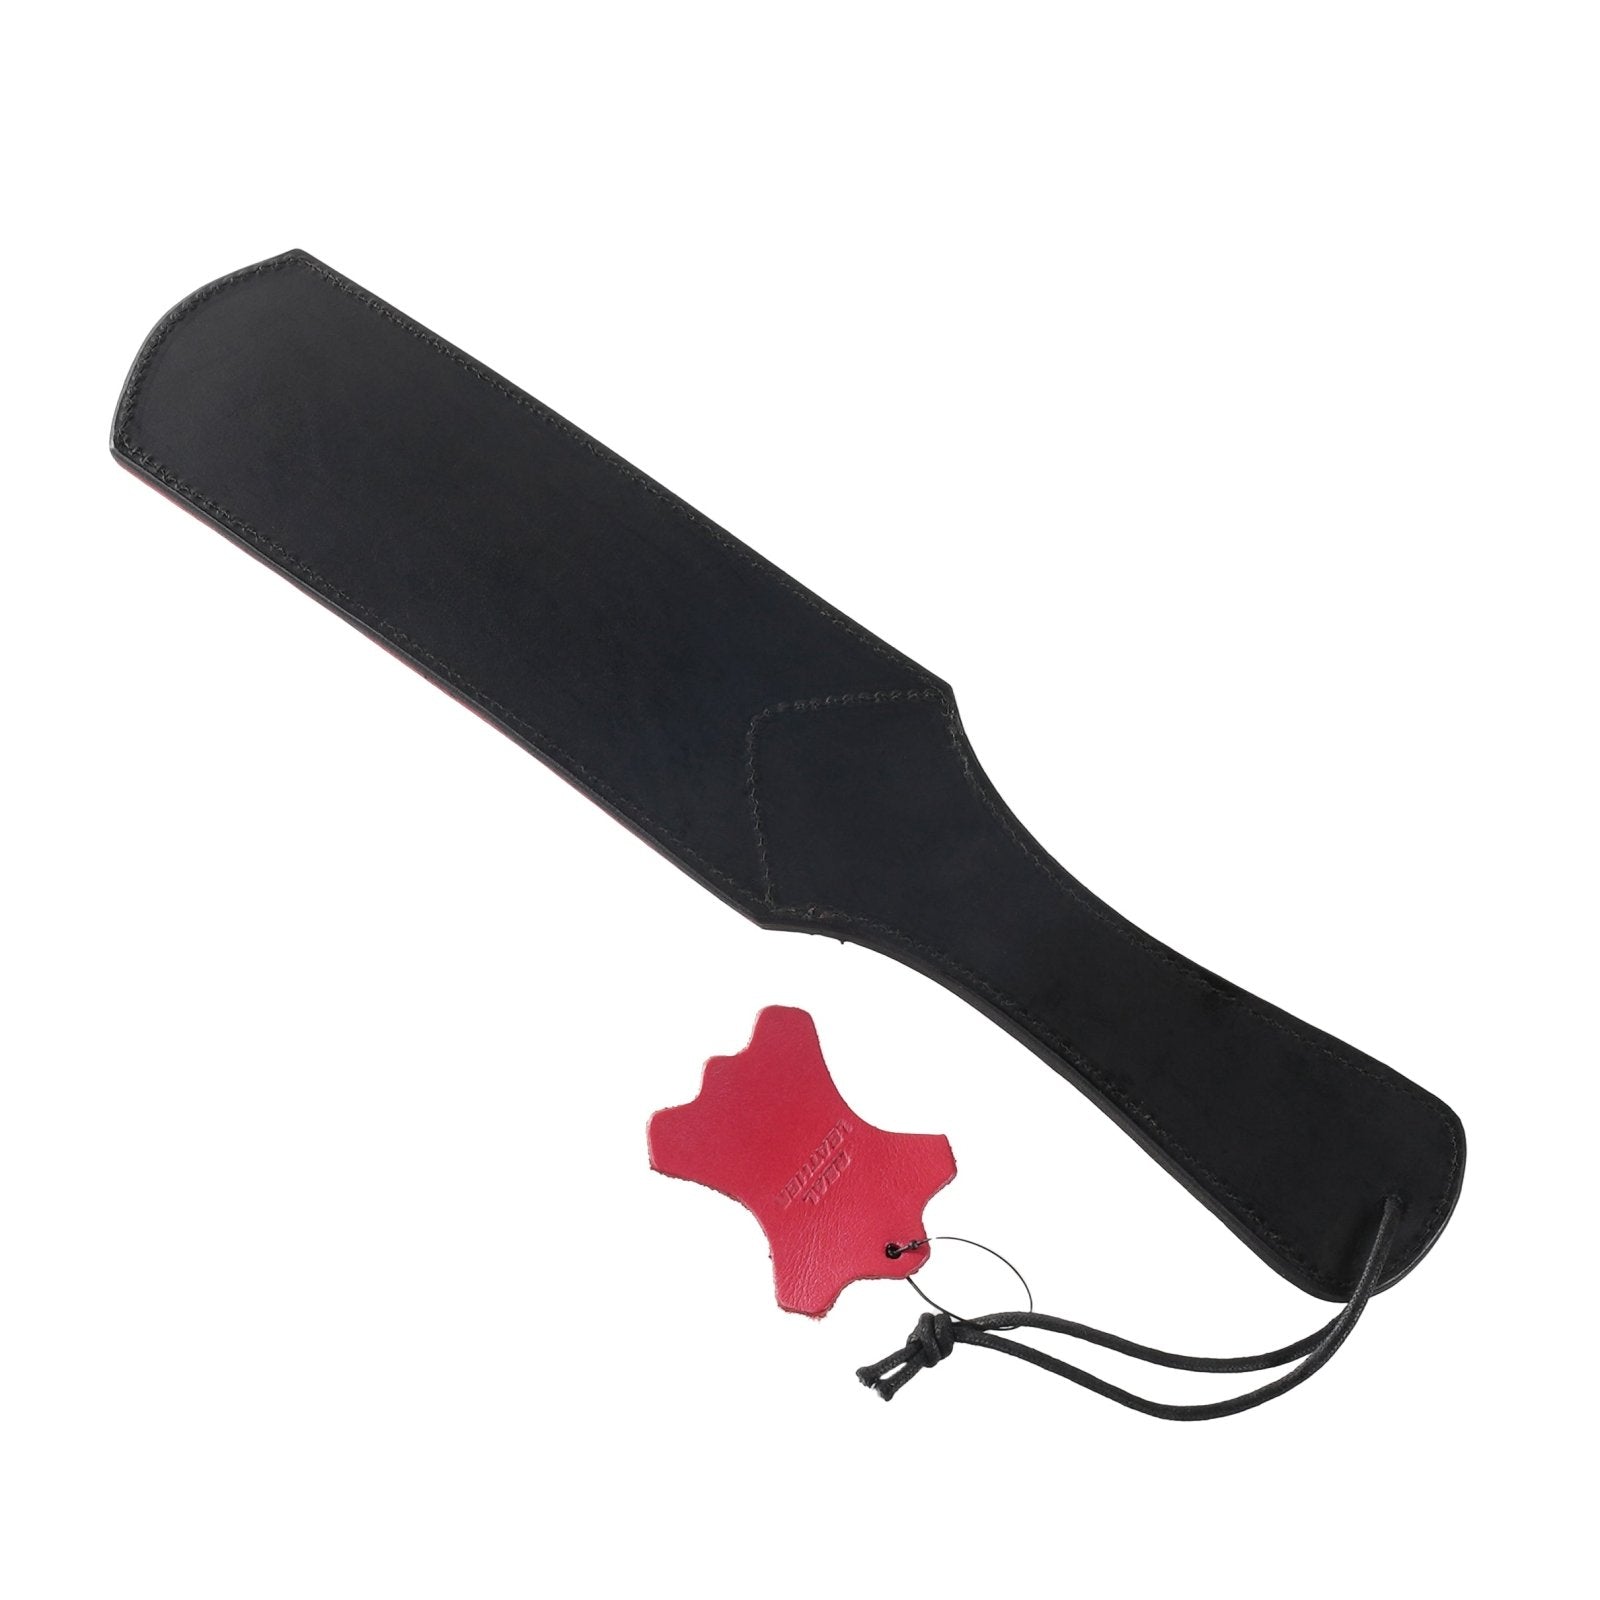 Core By Kink Padded Paddle 15" - Kink Store